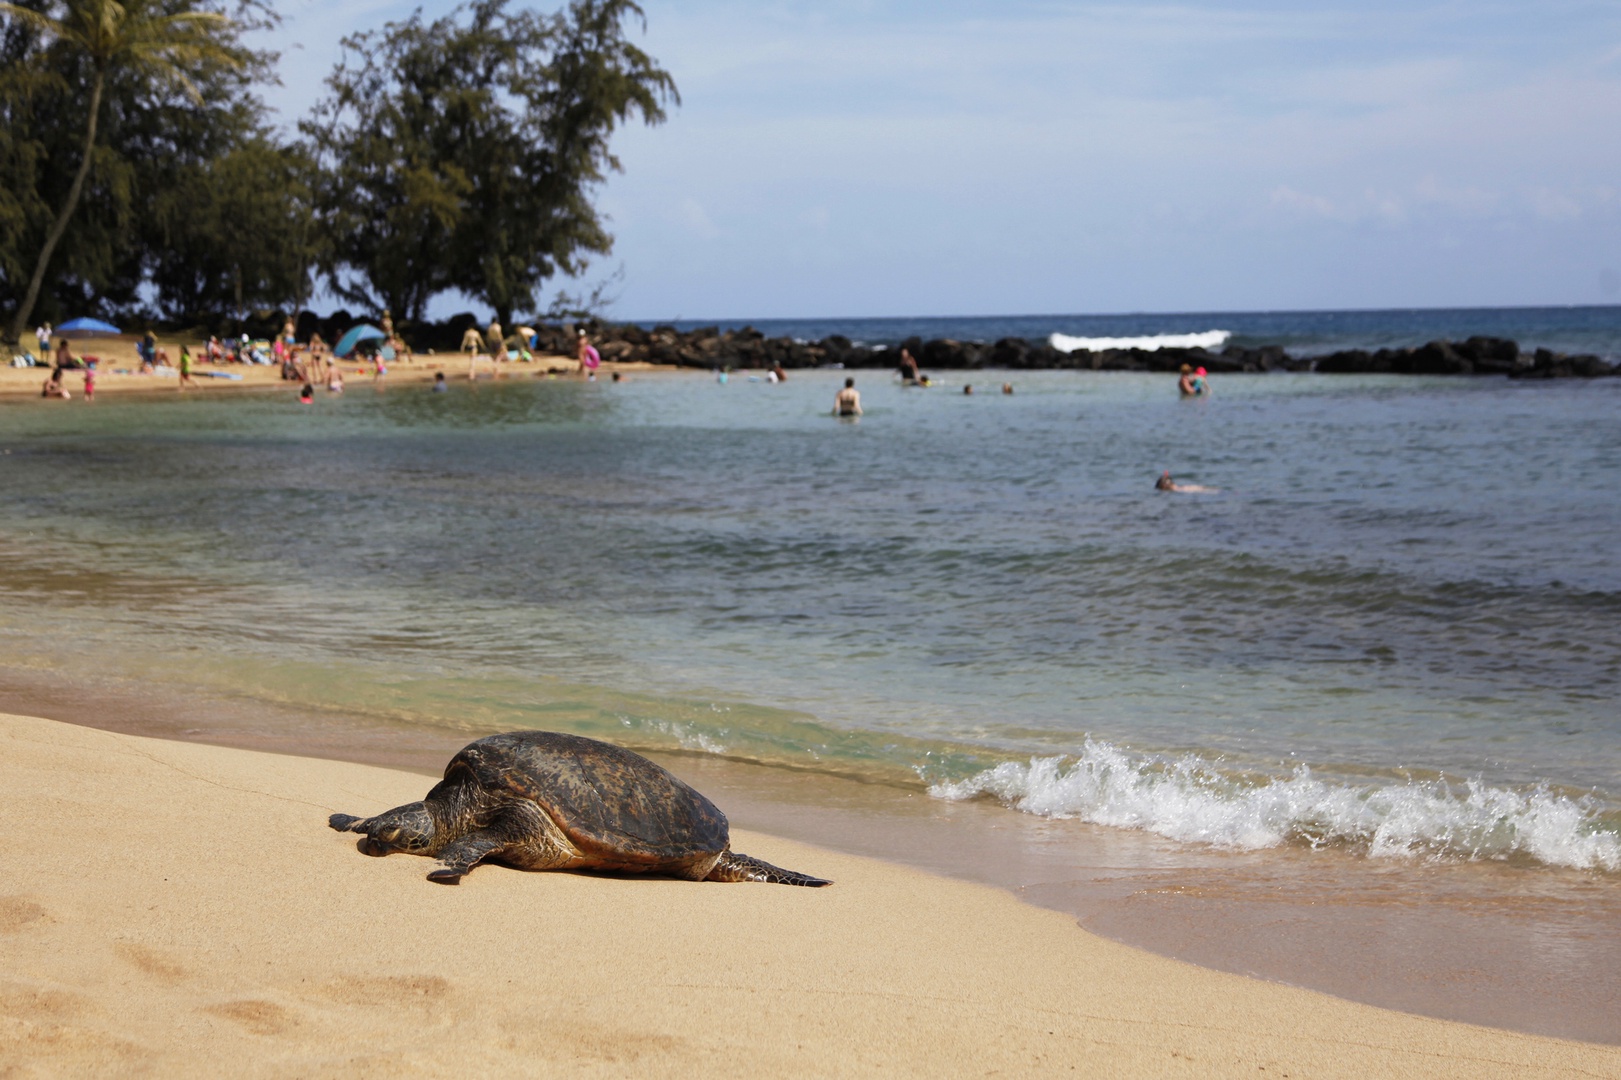 Koloa Vacation Rentals, Waikomo Streams 203 - A majestic encounter: a turtle gracefully navigating the turquoise waters of Poipu Beach